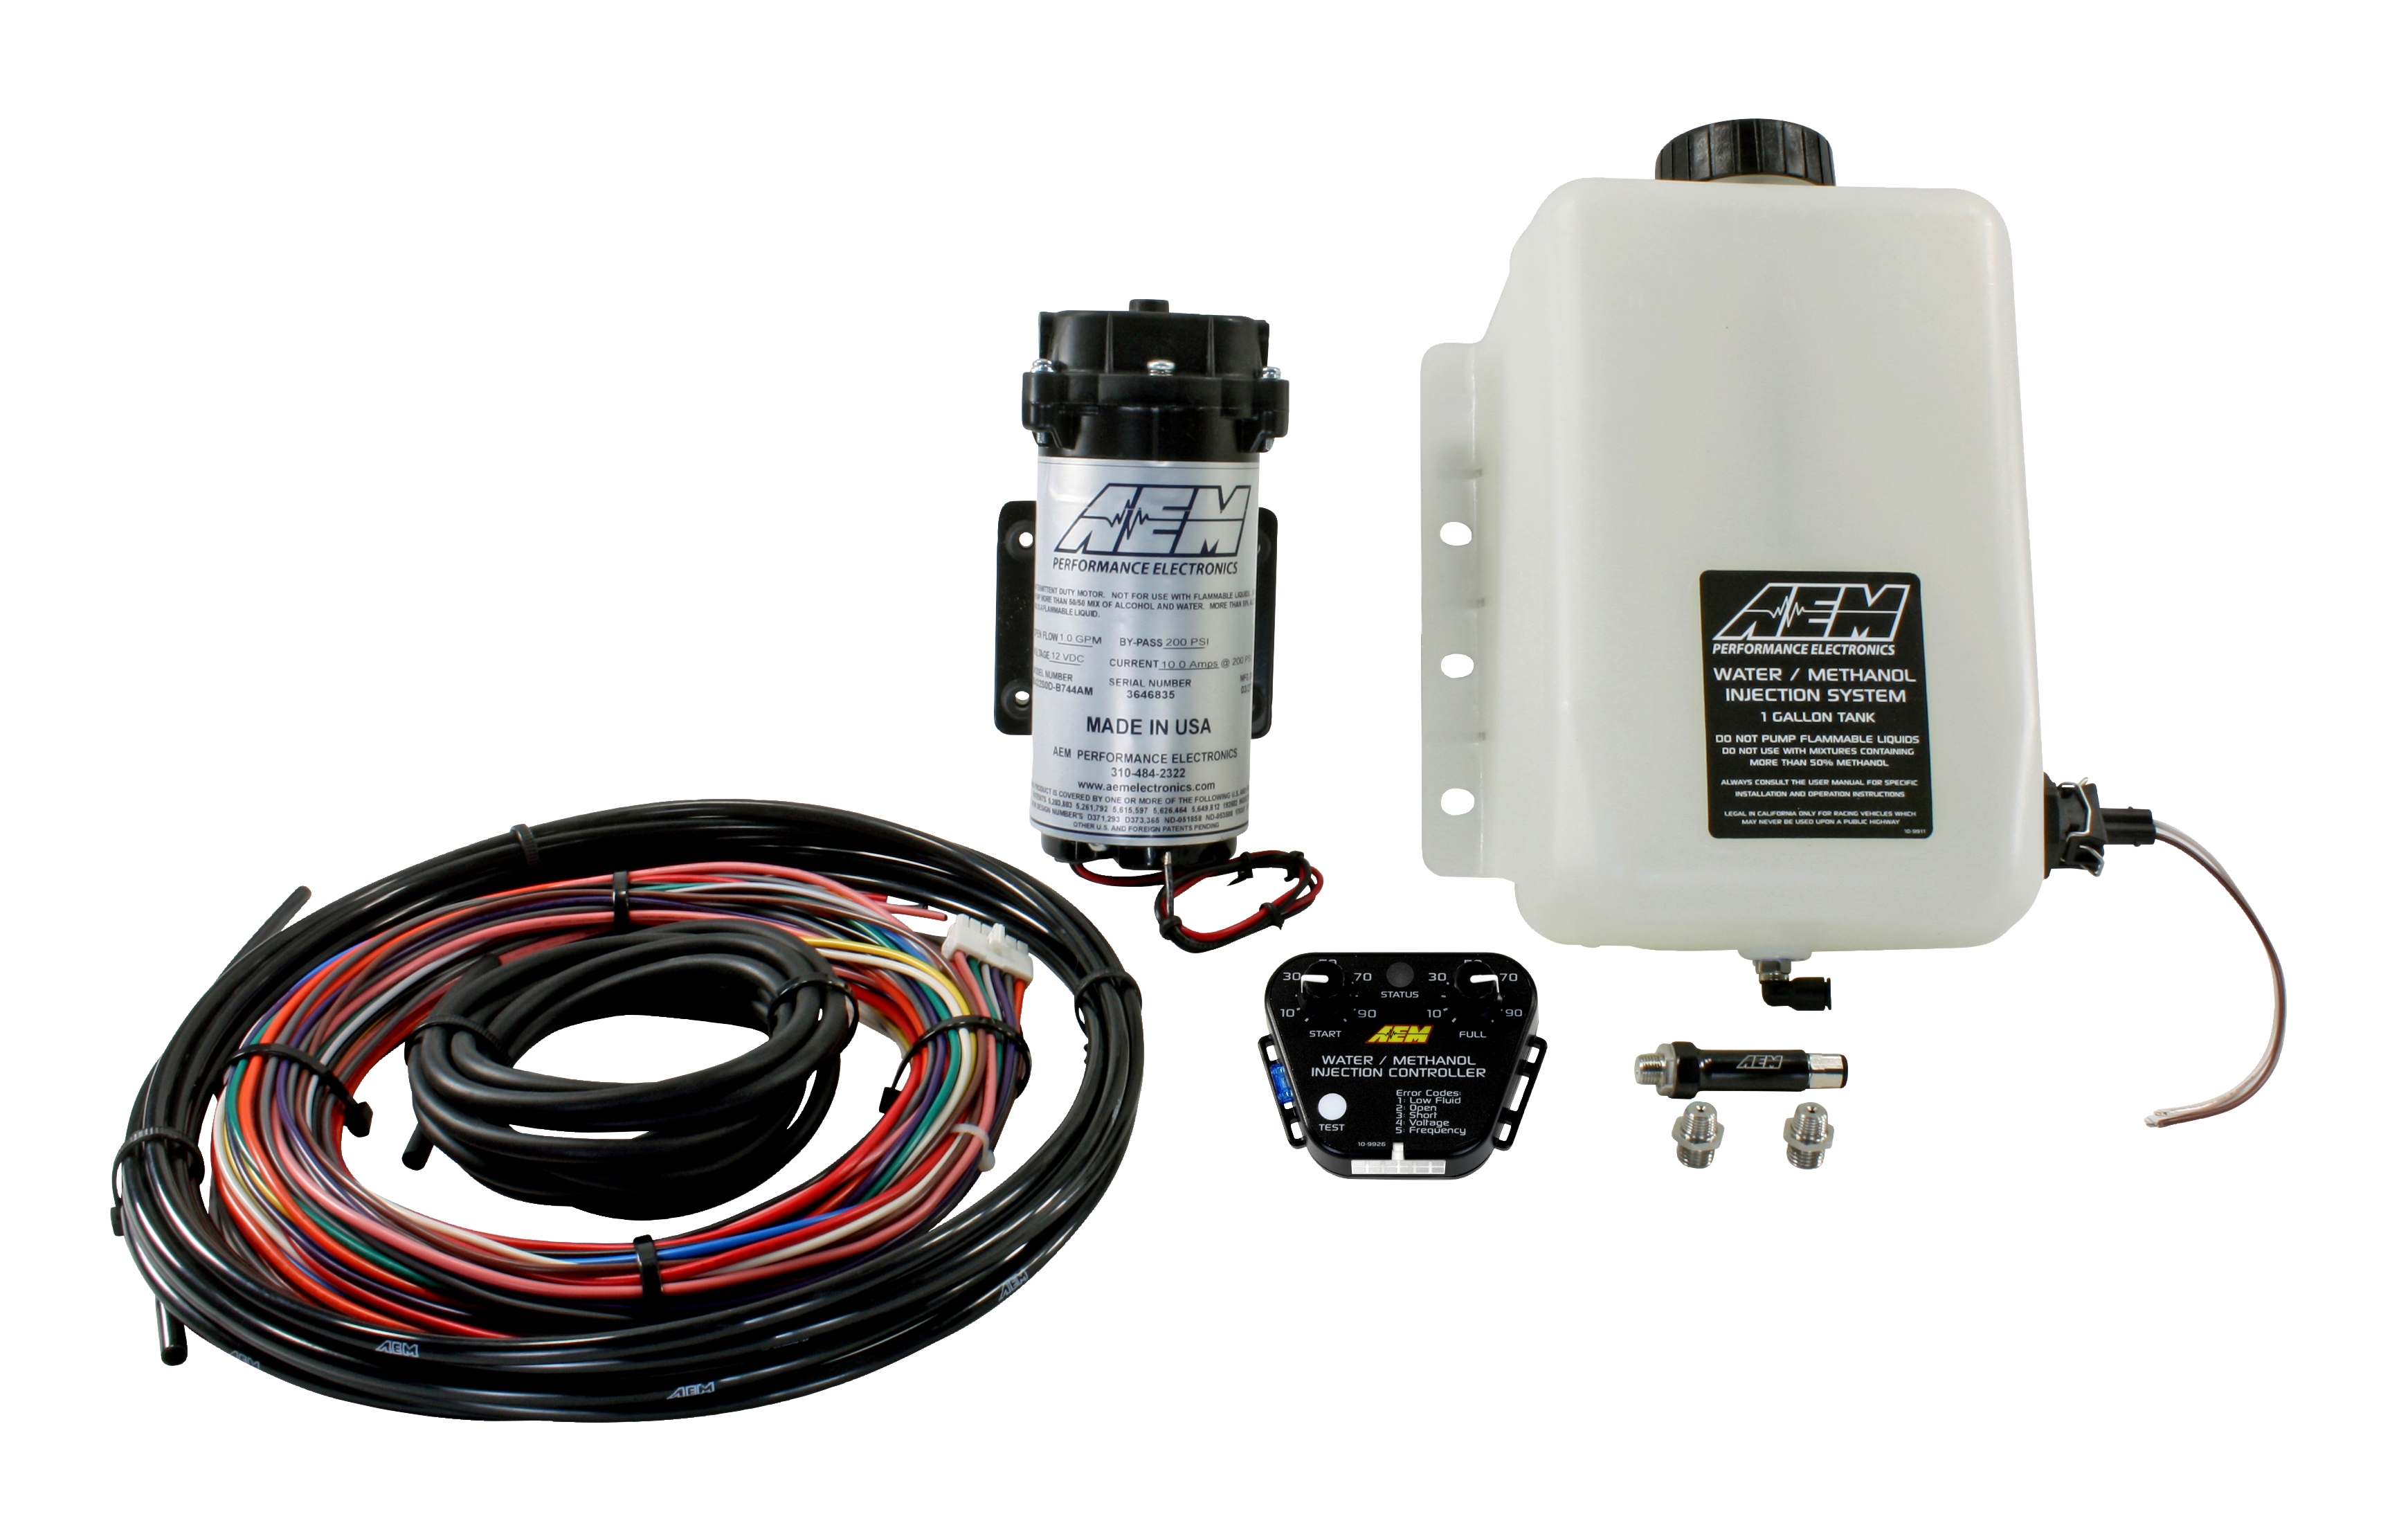 AEM V2 Water/Methanol Injection Kit, Multi Input Controller - 0-5v/MAF Frequency or Voltage/Duty Cycle/Ext MAP, 200psi WM Pump, 1 Gallon Reservoir, Conductive Fluid Level Sensor